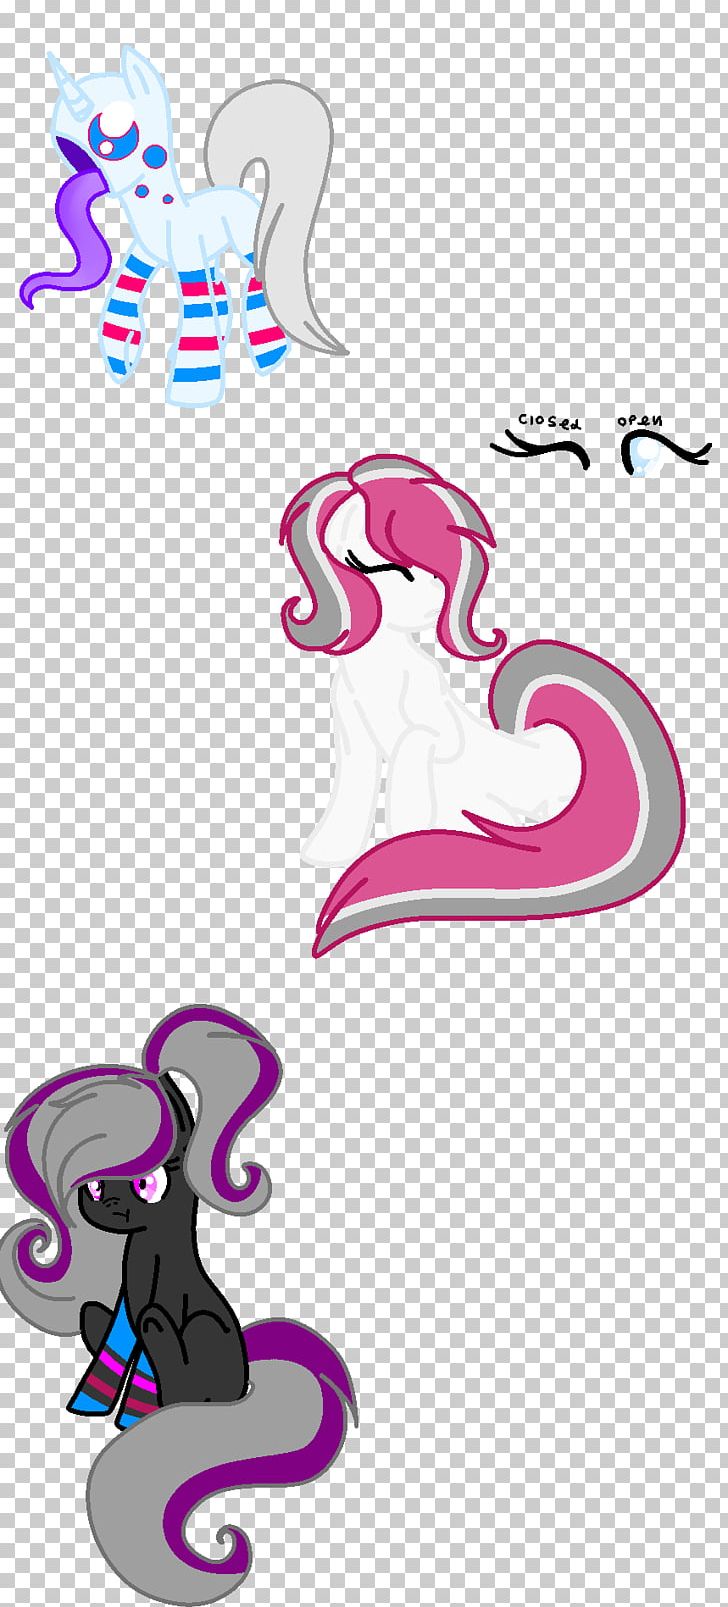 Vertebrate Pink M PNG, Clipart, Art, Cartoon, Character, Fictional Character, Graphic Design Free PNG Download